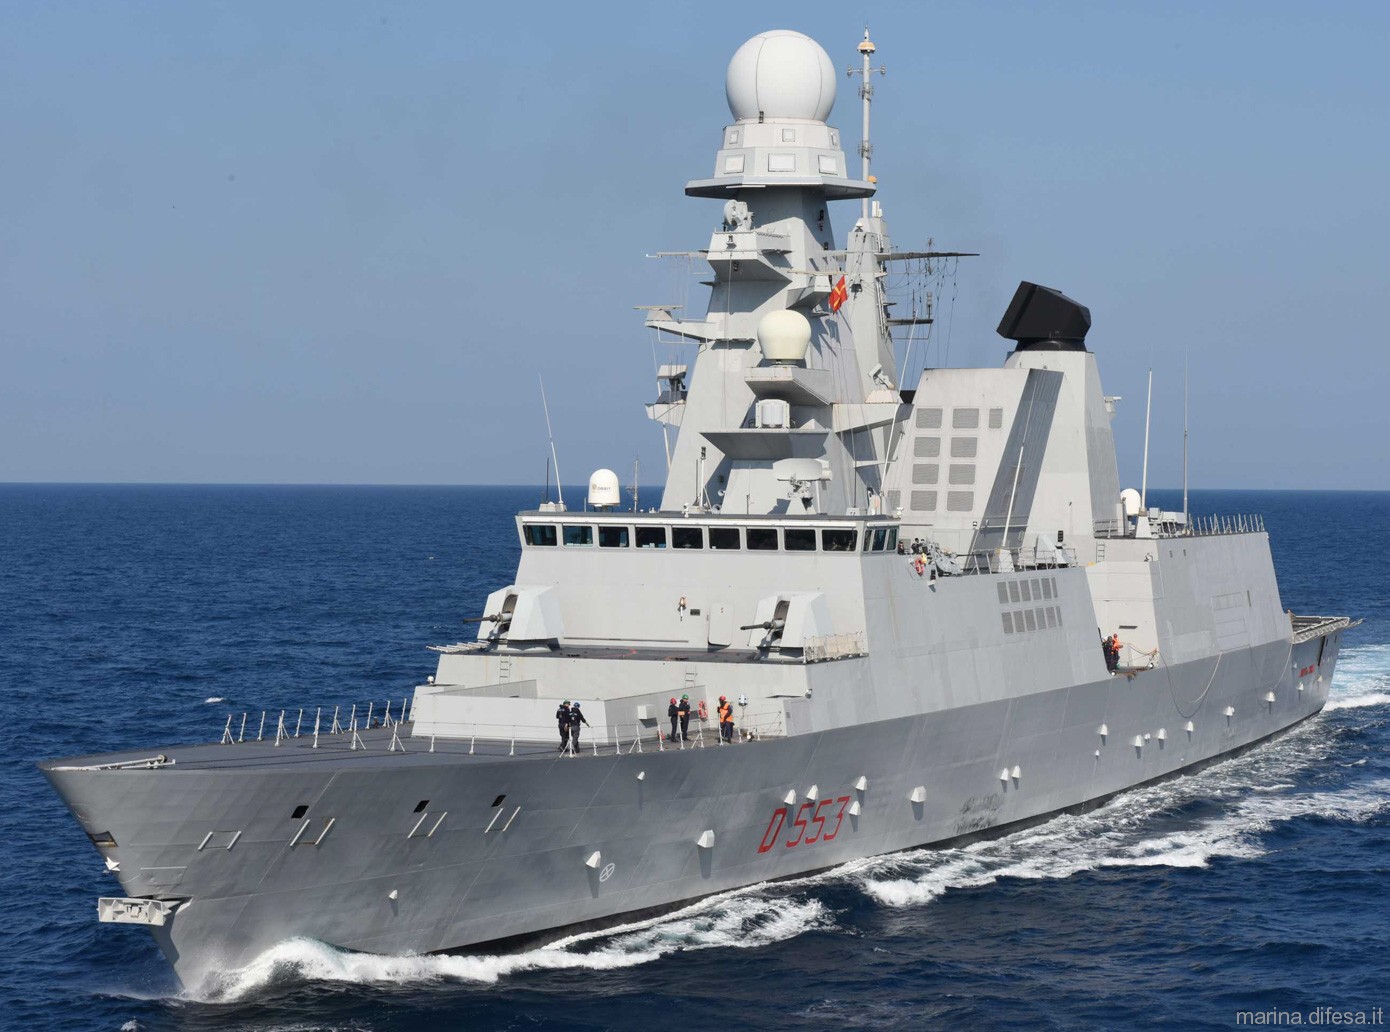 d-553 its andrea doria guided missile destroyer ddgh horizon class italian navy 43